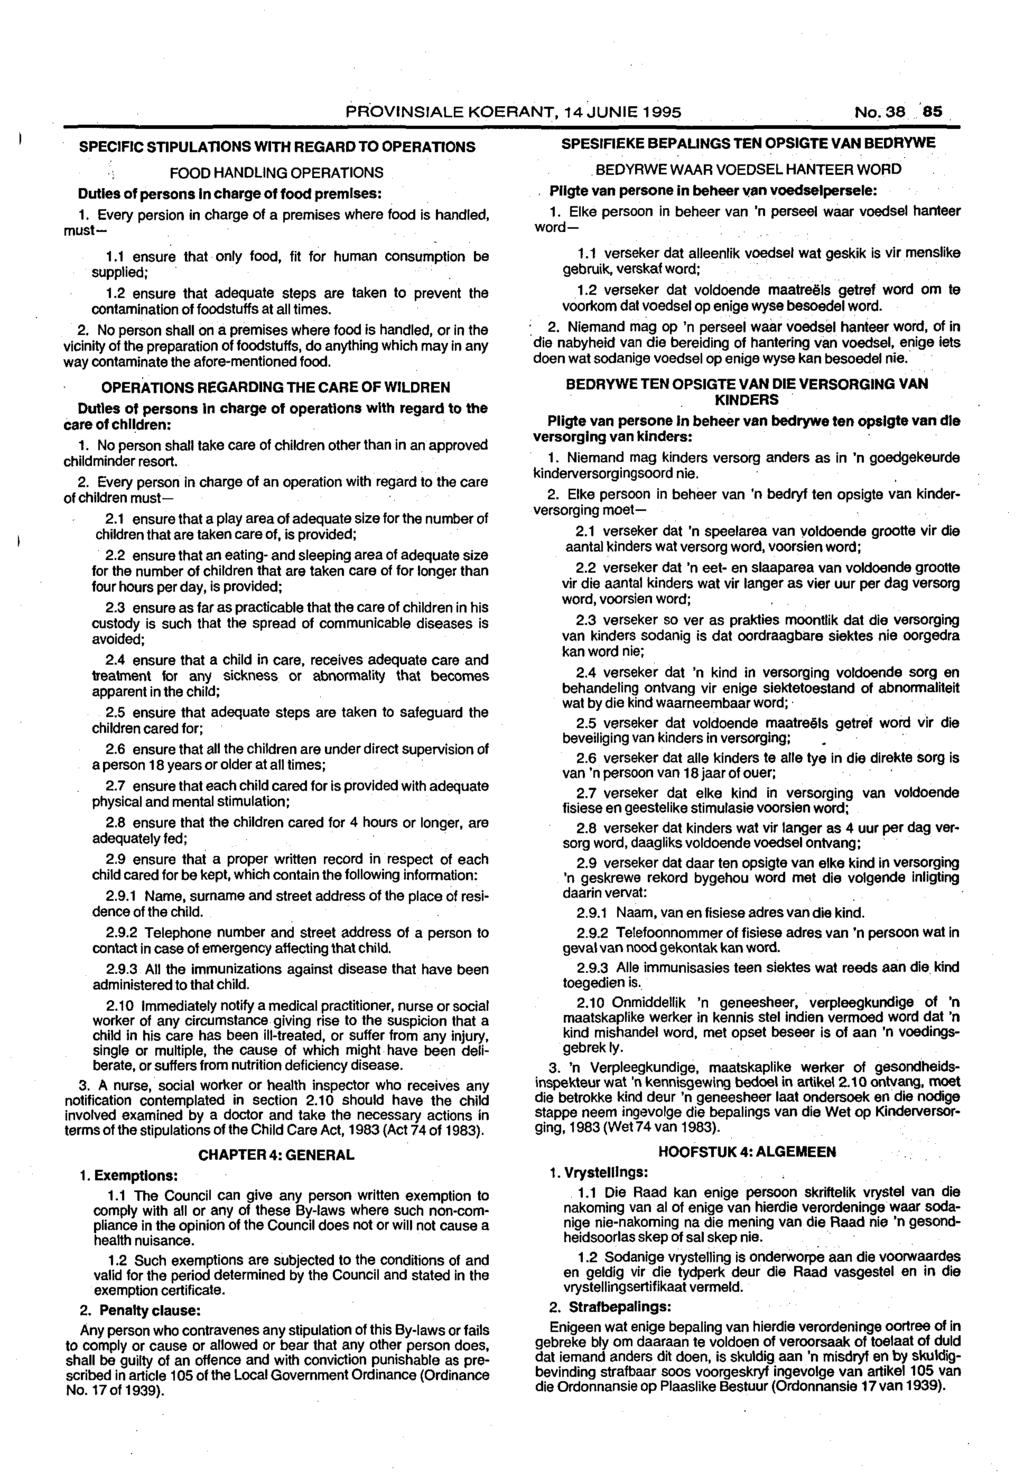 PROVINSIALE KOERANT, 14JUNIE 1995 No. as SPECIFIC STIPULATIONS WITH REGARD TO OPERATIONS FOOD HANDLING OPERATIONS Duties of persons In charge of food premises: 1.